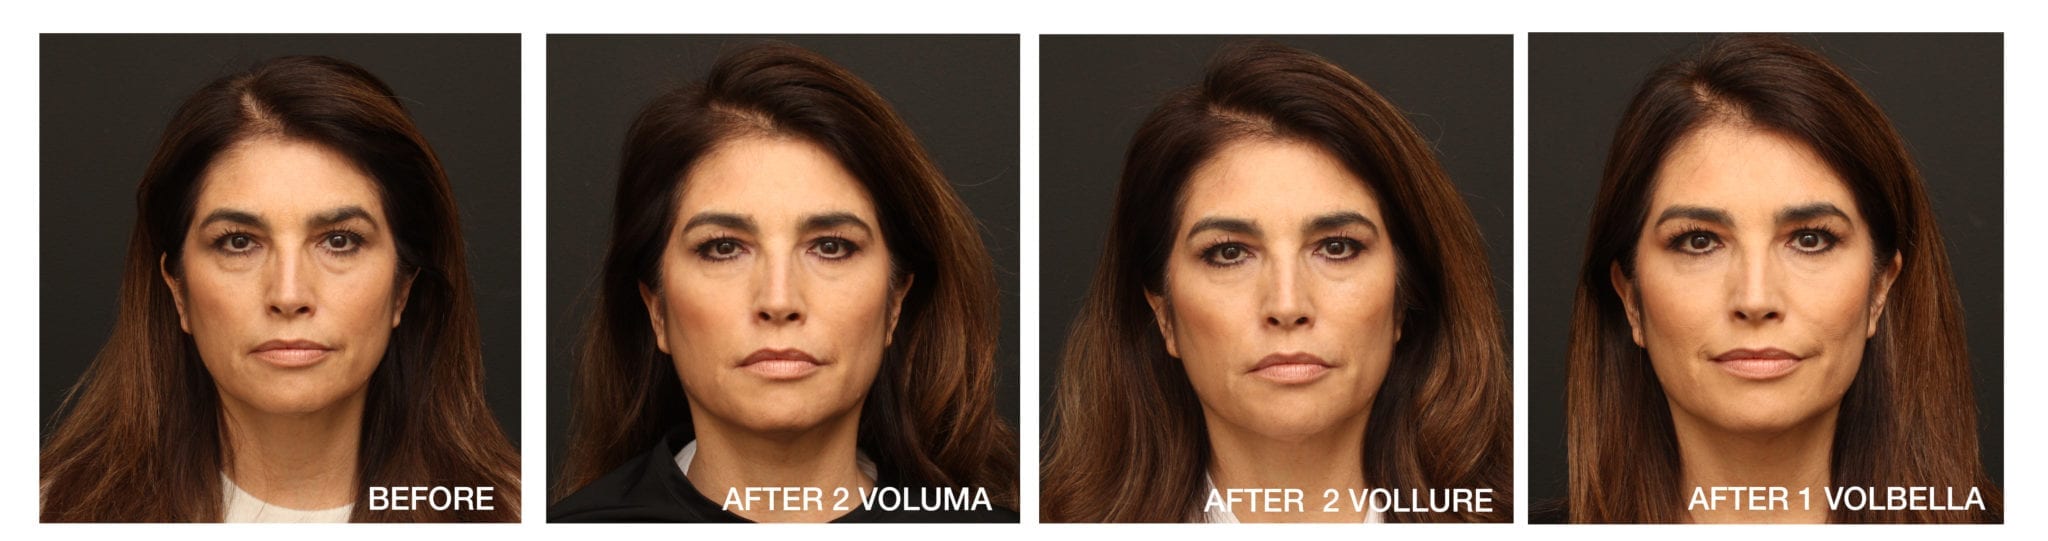 Progression on face during Juvéderm treatments